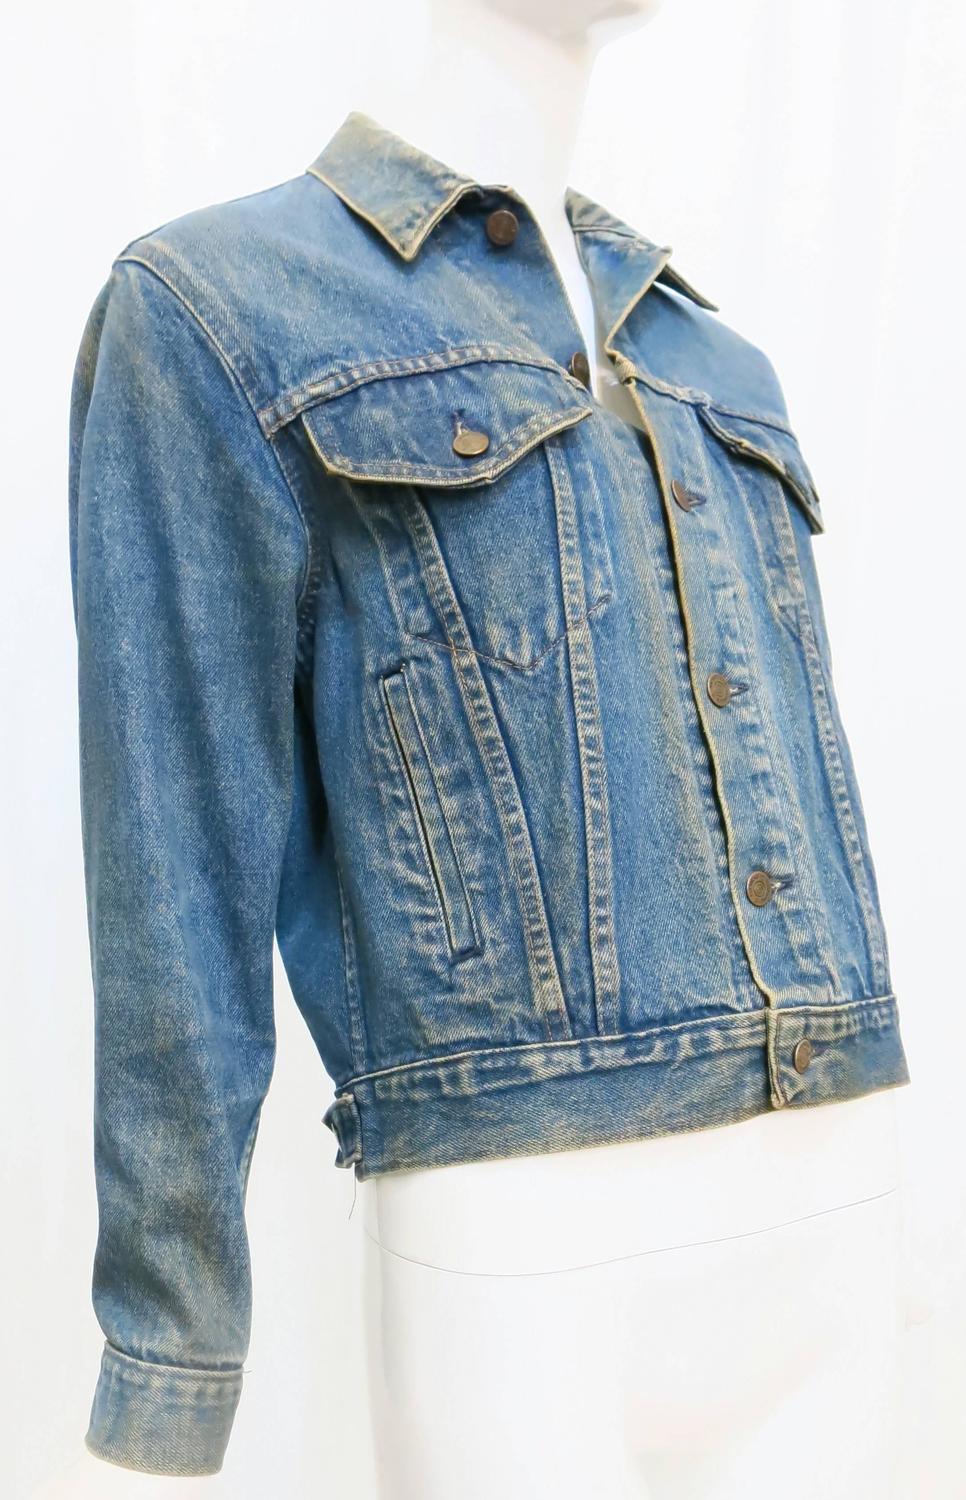 1970s Sears Roebuck and Co. Led Zeppelin Denim Jacket at 1stdibs